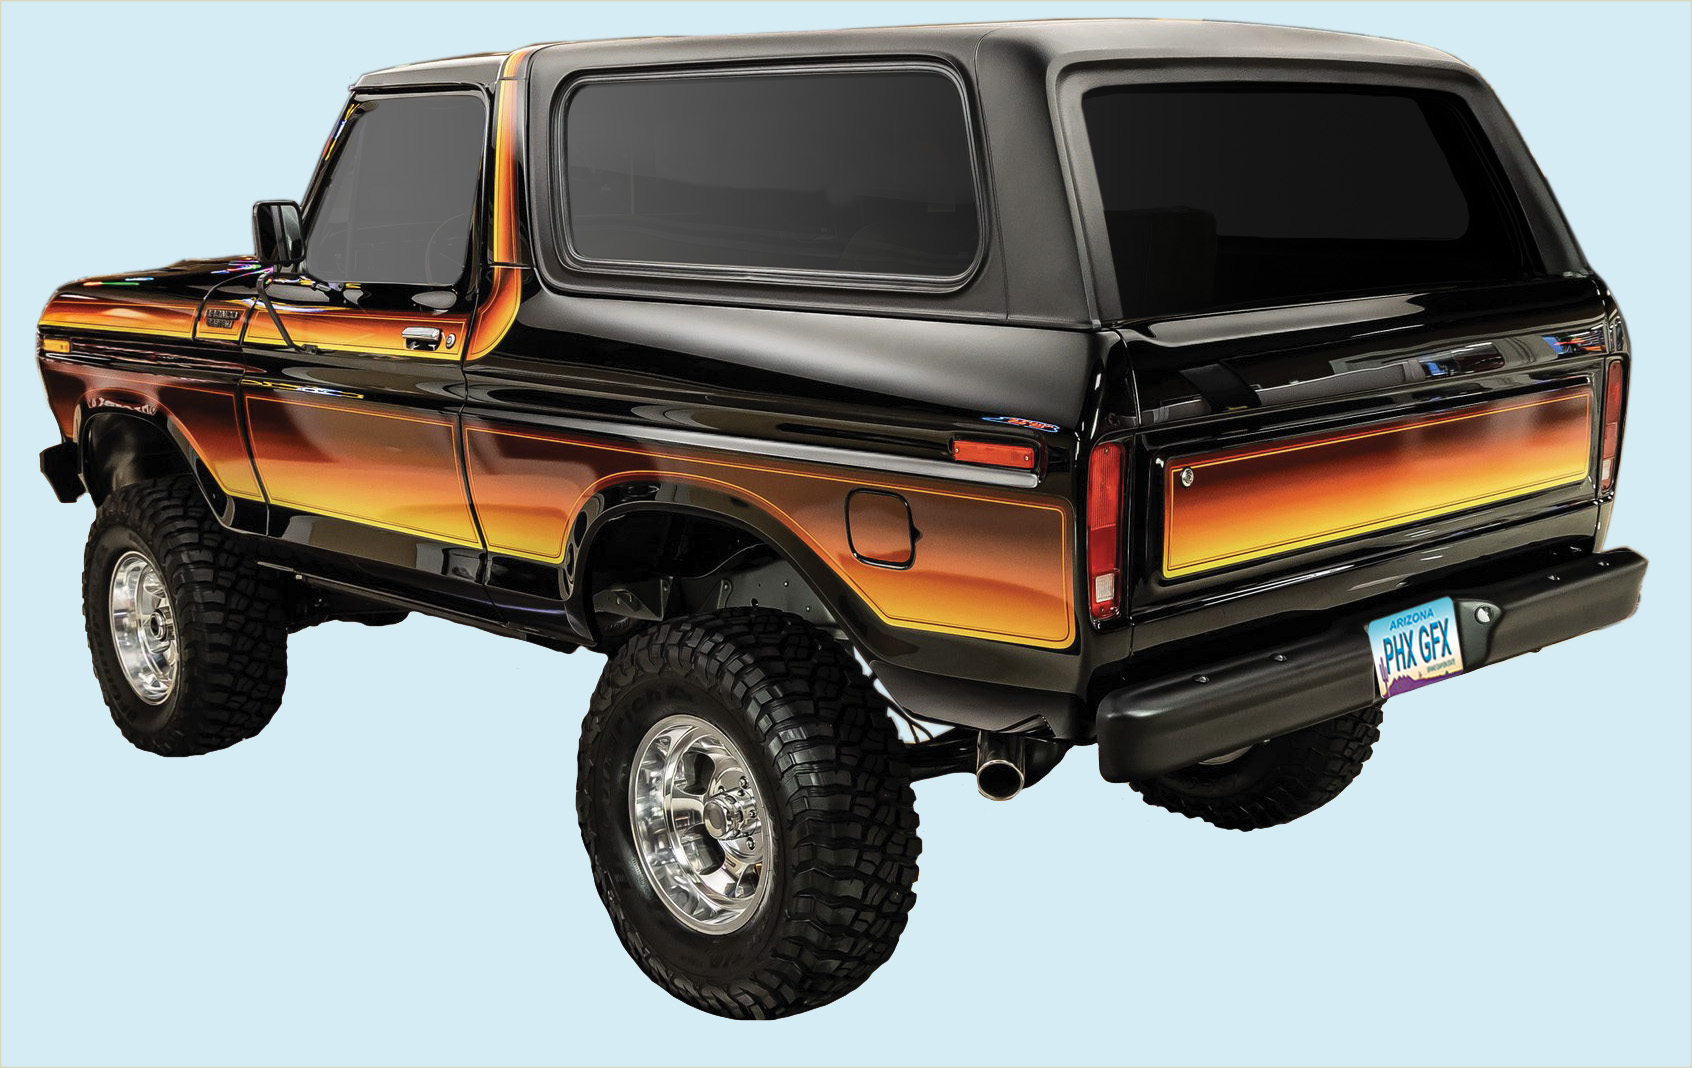 1979 Ford Bronco Free Wheeling Truck (with Chromatic Stripes)